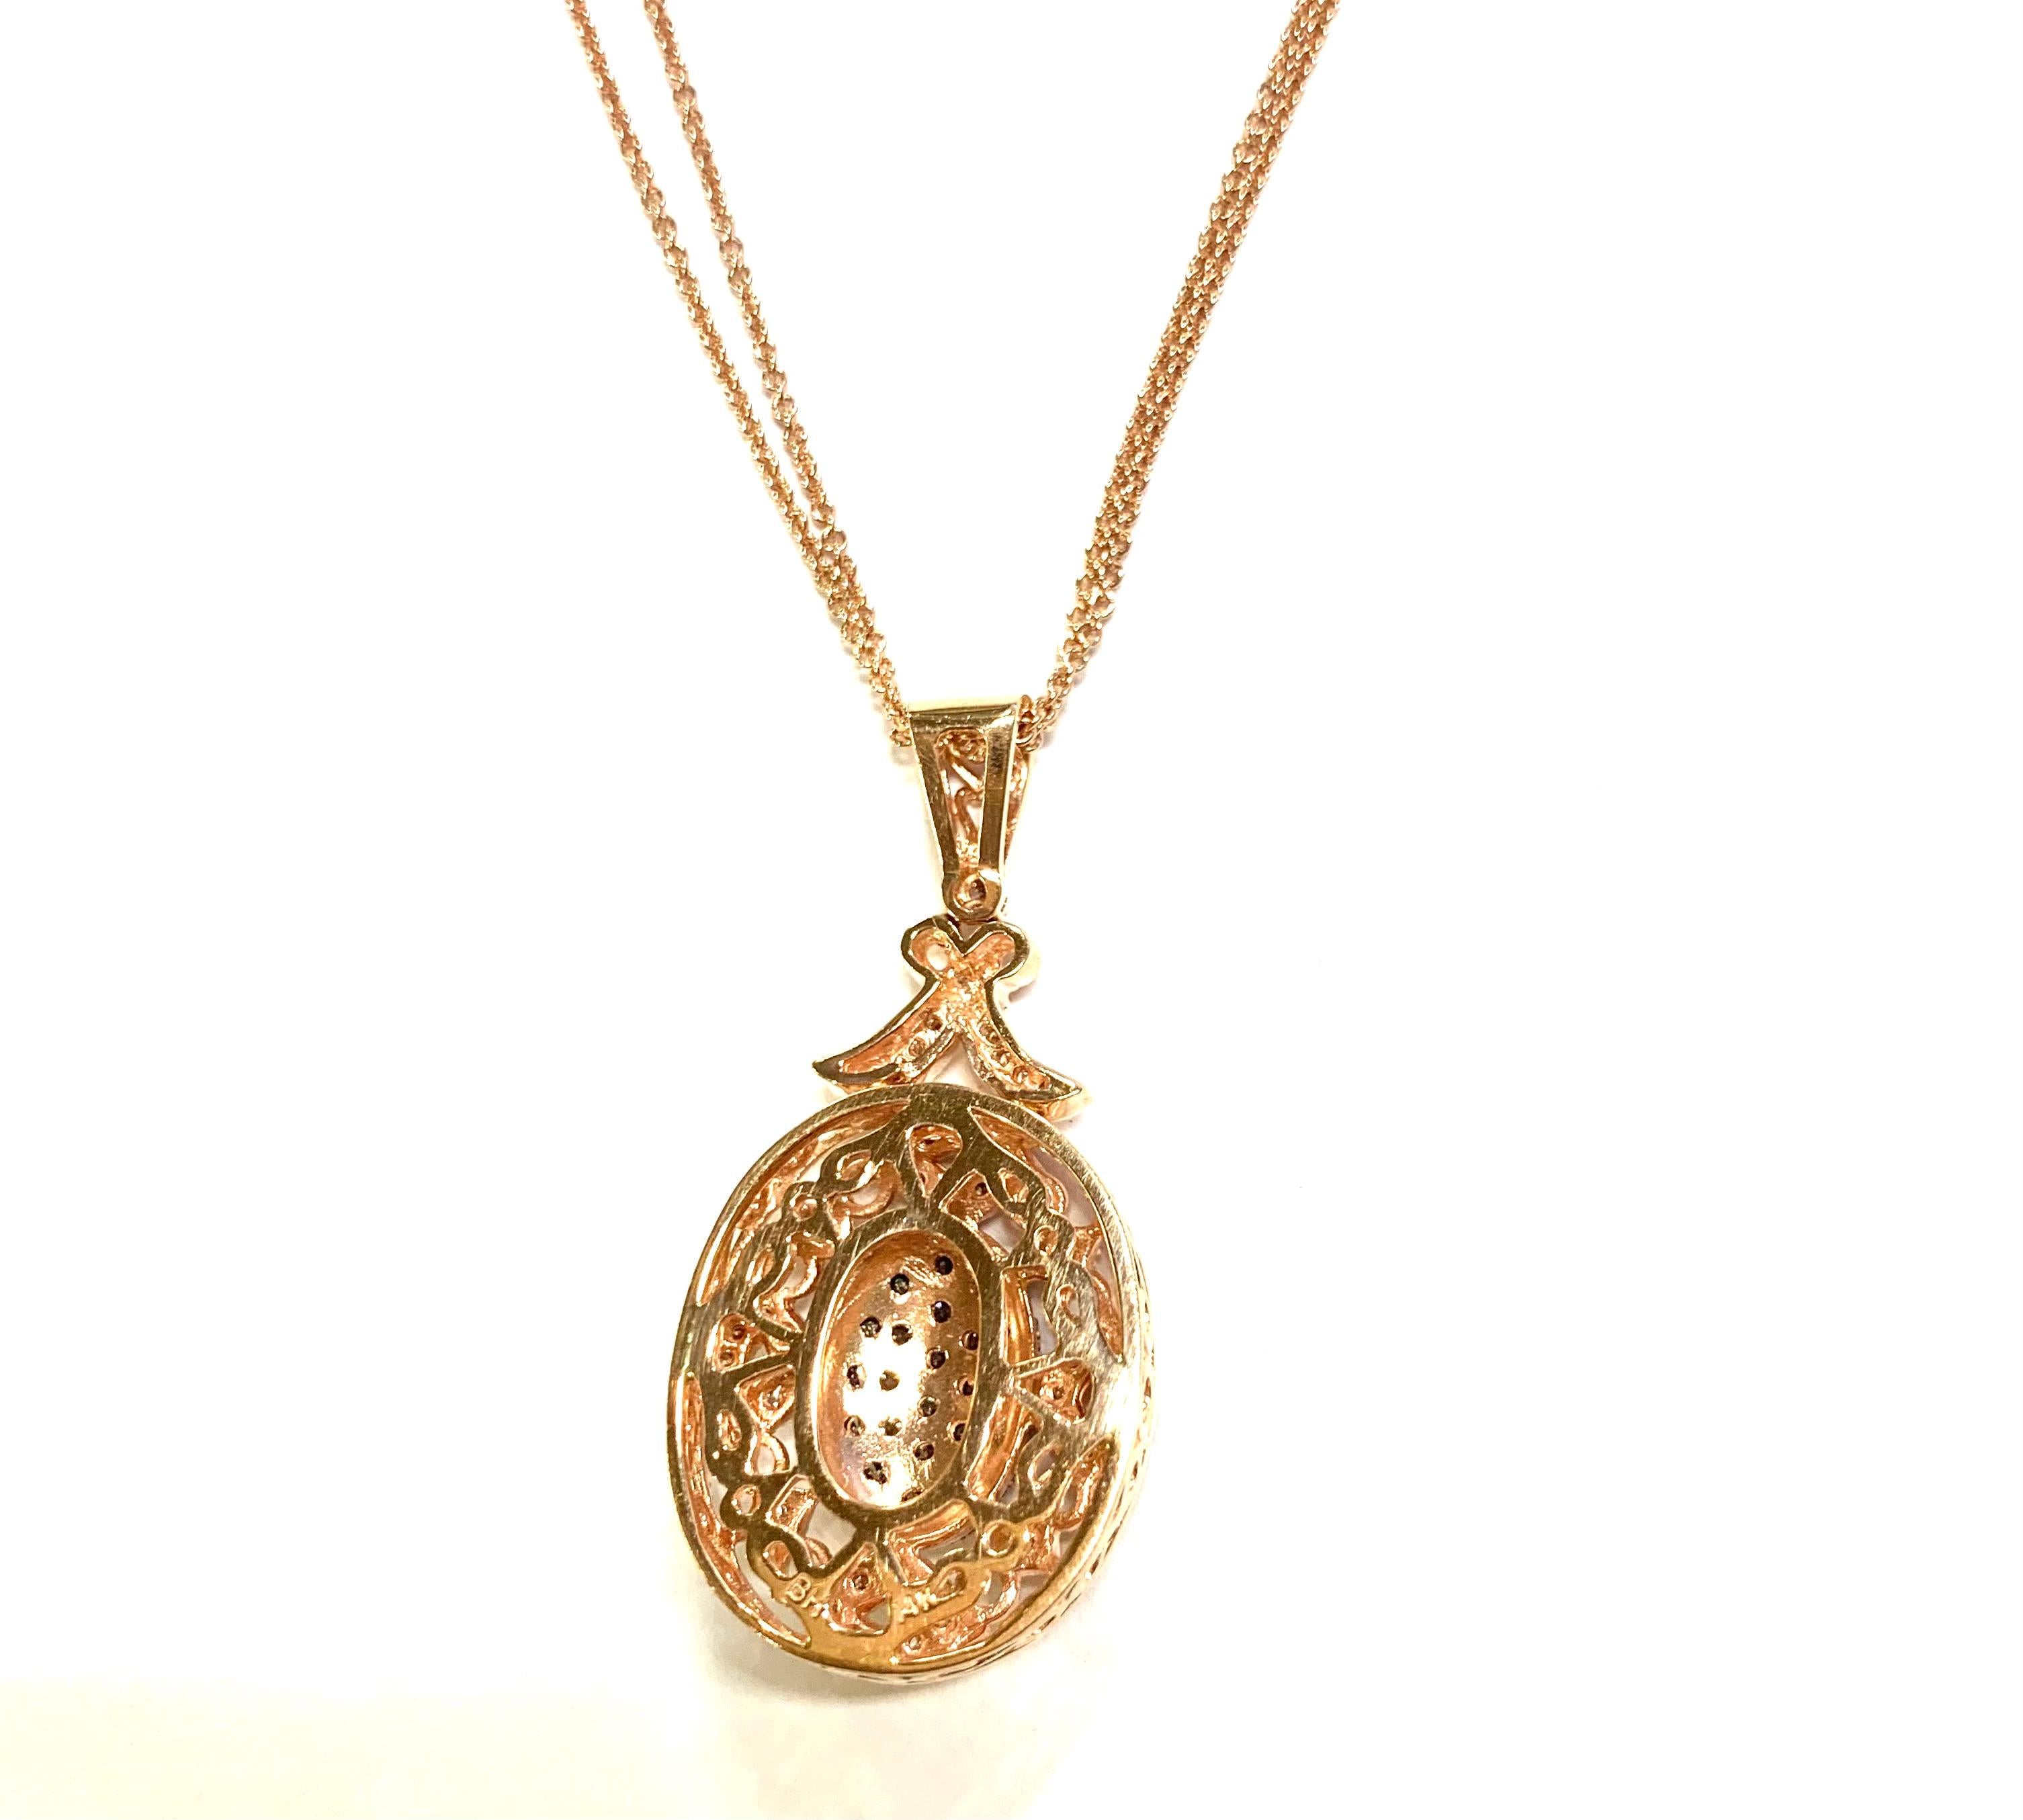 Stunning Fancy Diamond and Rose Gold Pendant Necklace on Double Link Chain

Exquisite Tourmaline Cabochon, Diamond and Pearl Pendant Necklace 

Stone: Brown and White Diamonds
Stone Carat Weight: 0.75 Carat
Stone: 67 Diamonds
Stone Carat Weight: